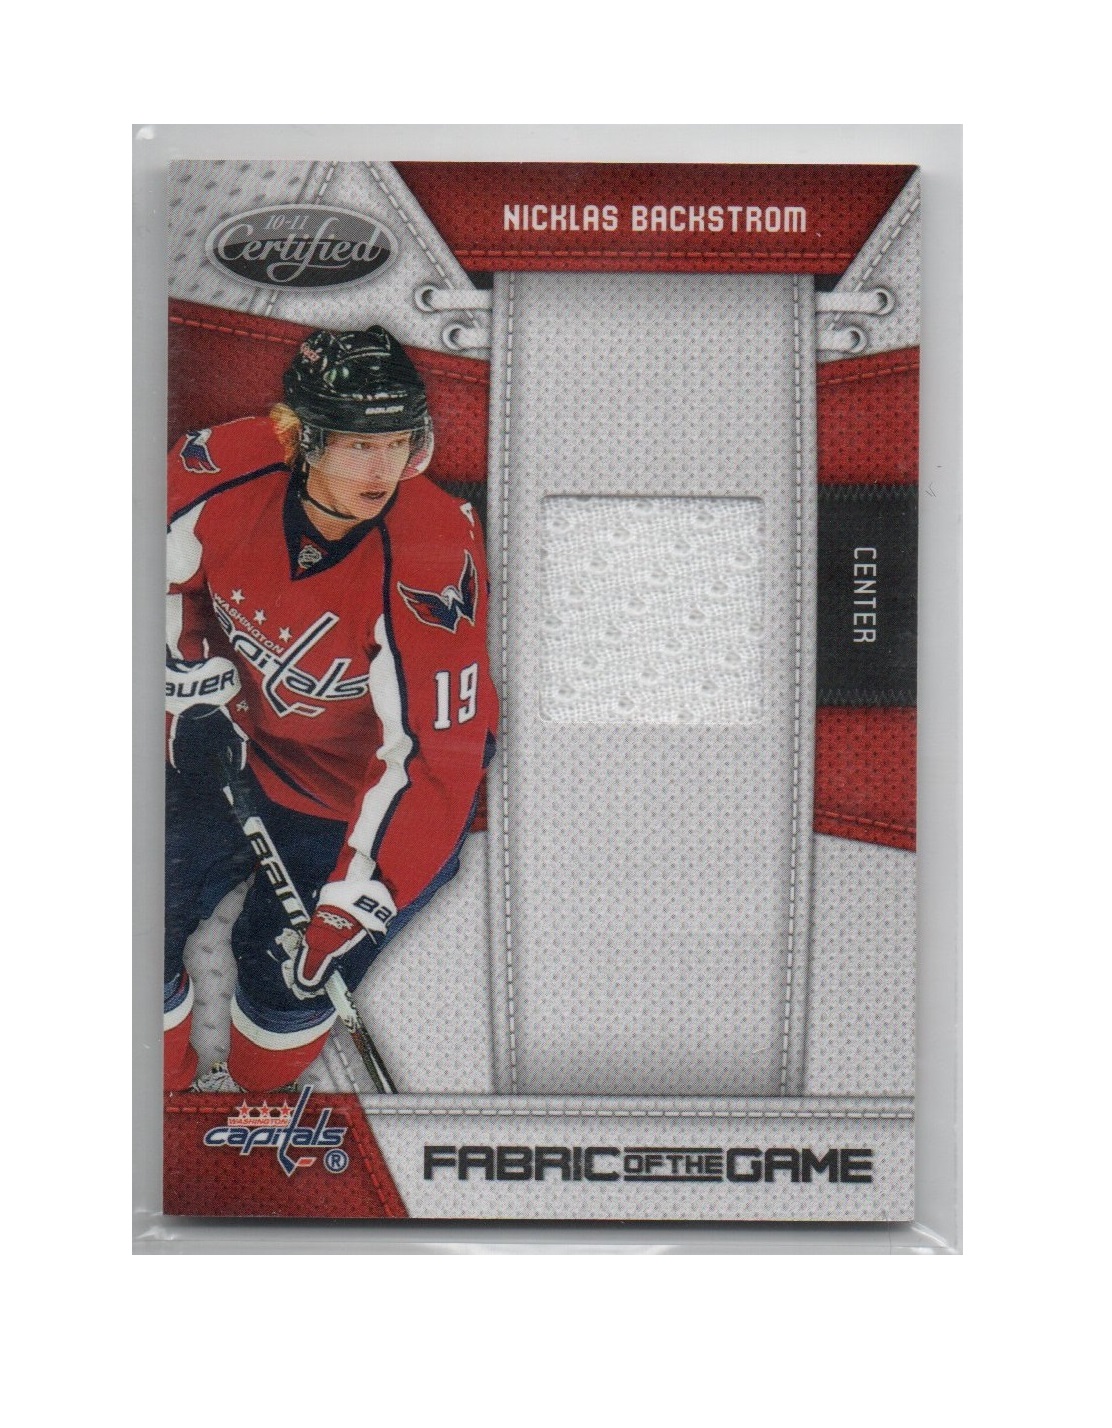 2010-11 Certified Fabric of the Game #NCB Nicklas Backstrom (50-X147-CAPITALS)